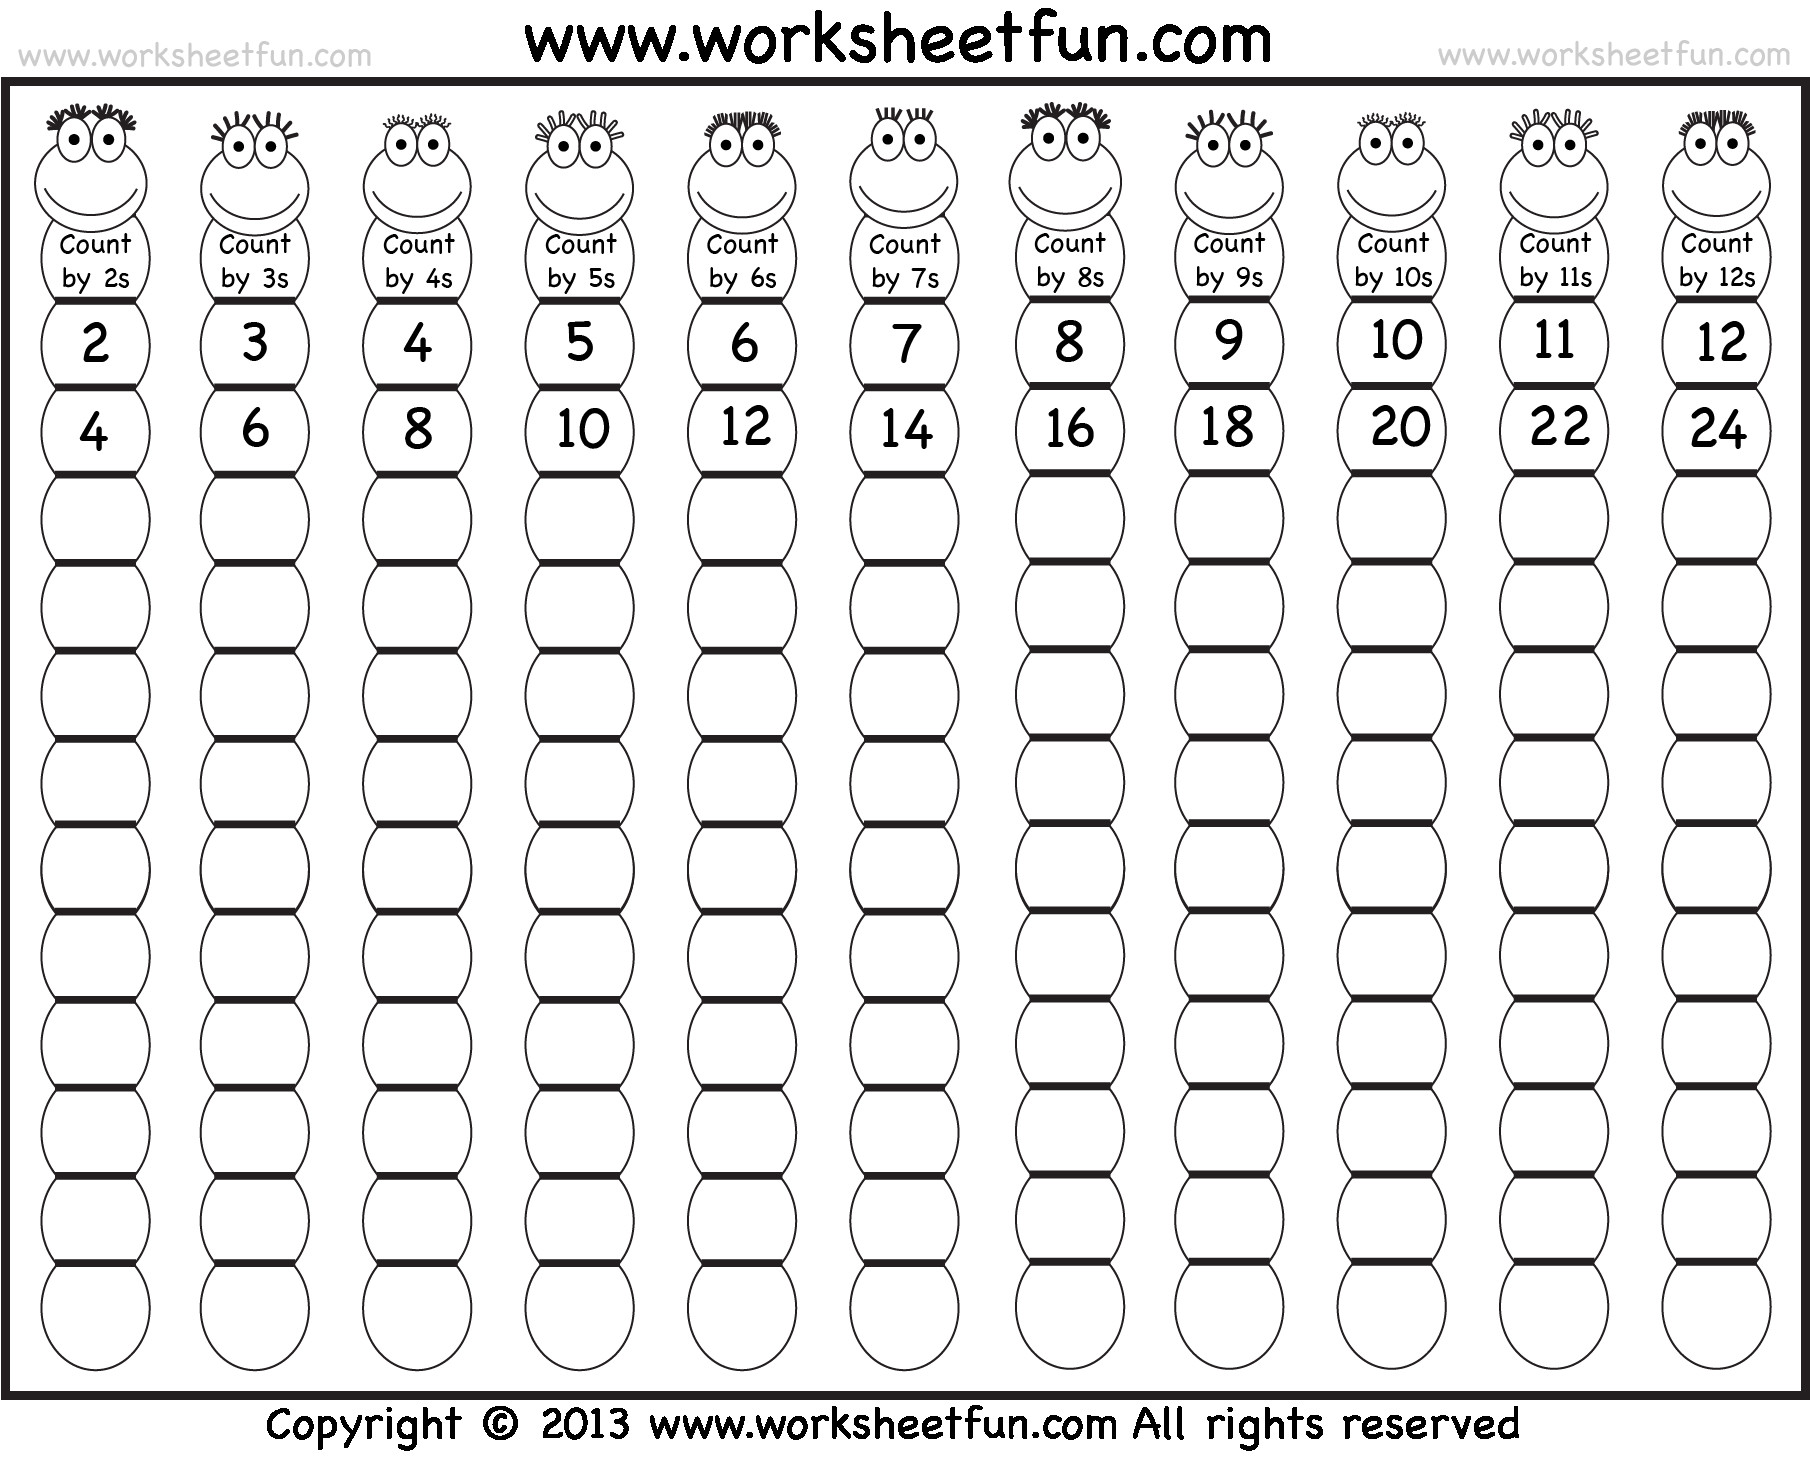 Free Math Worksheets Second Grade 2 Skip Counting Skip Counting by 20